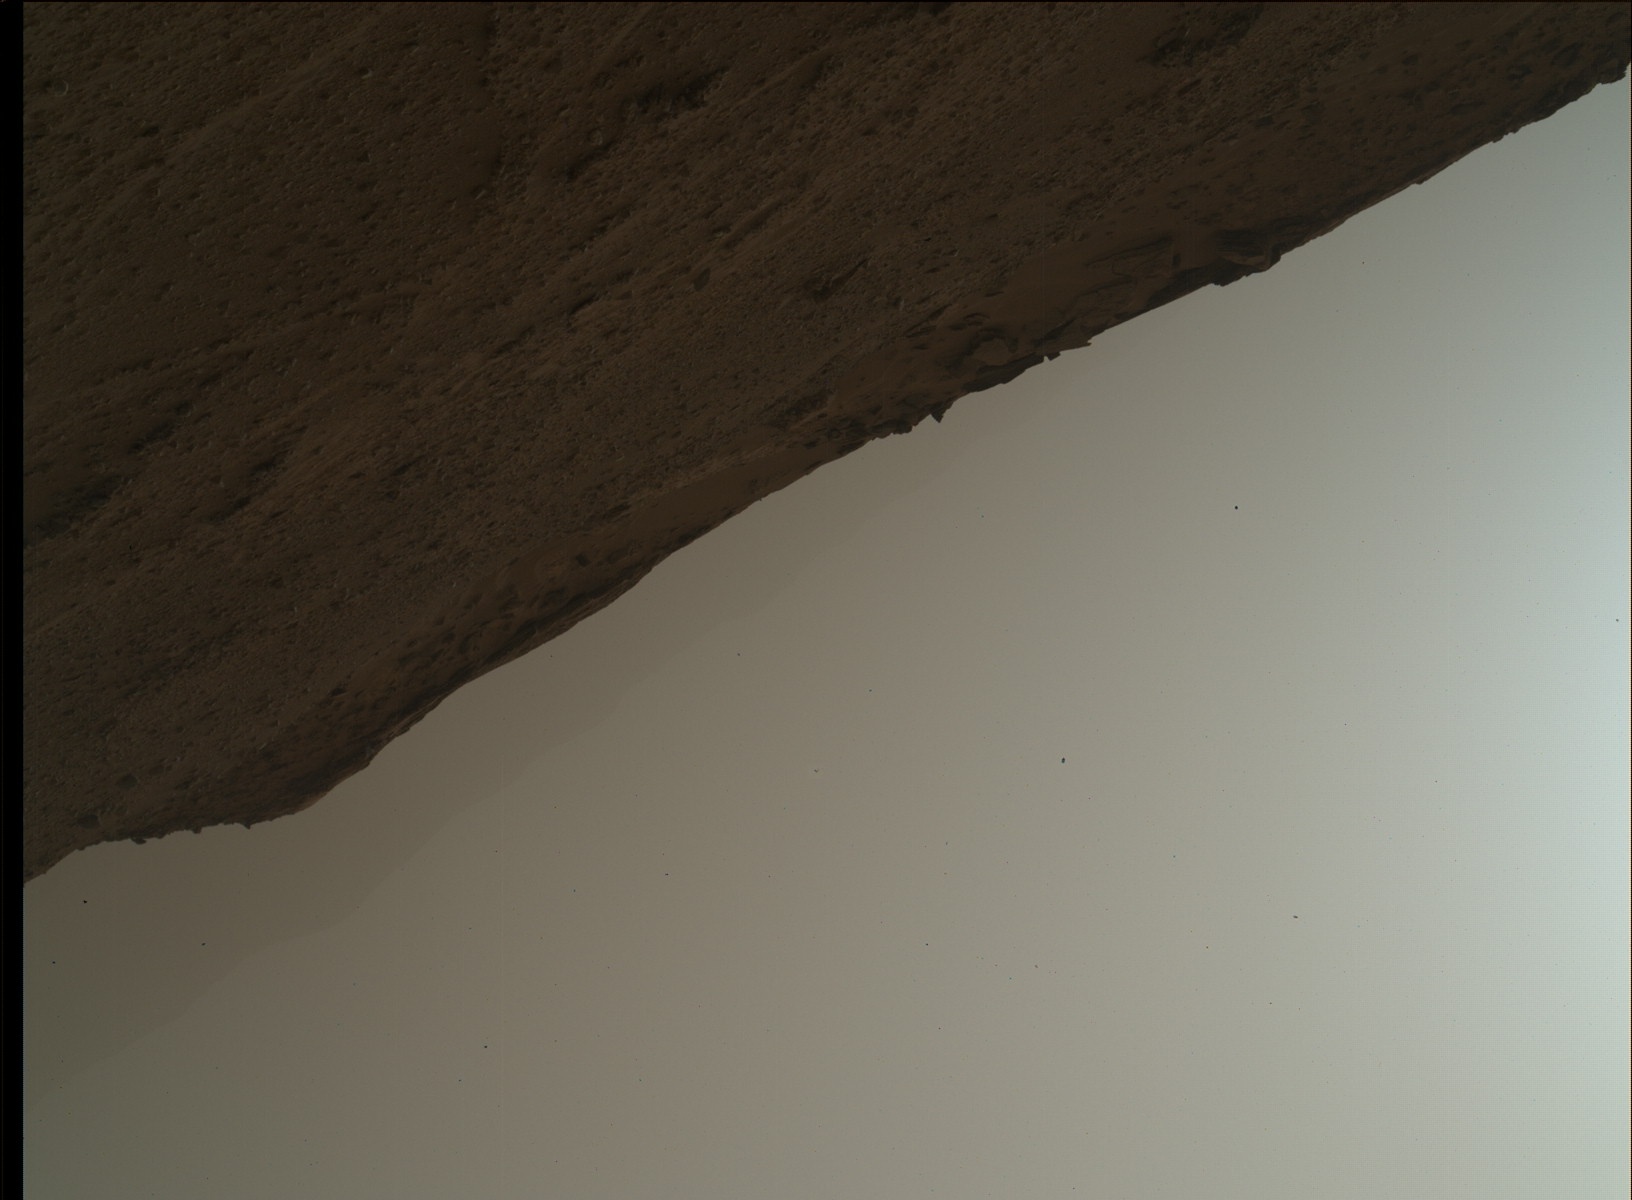 Nasa's Mars rover Curiosity acquired this image using its Mars Hand Lens Imager (MAHLI) on Sol 797